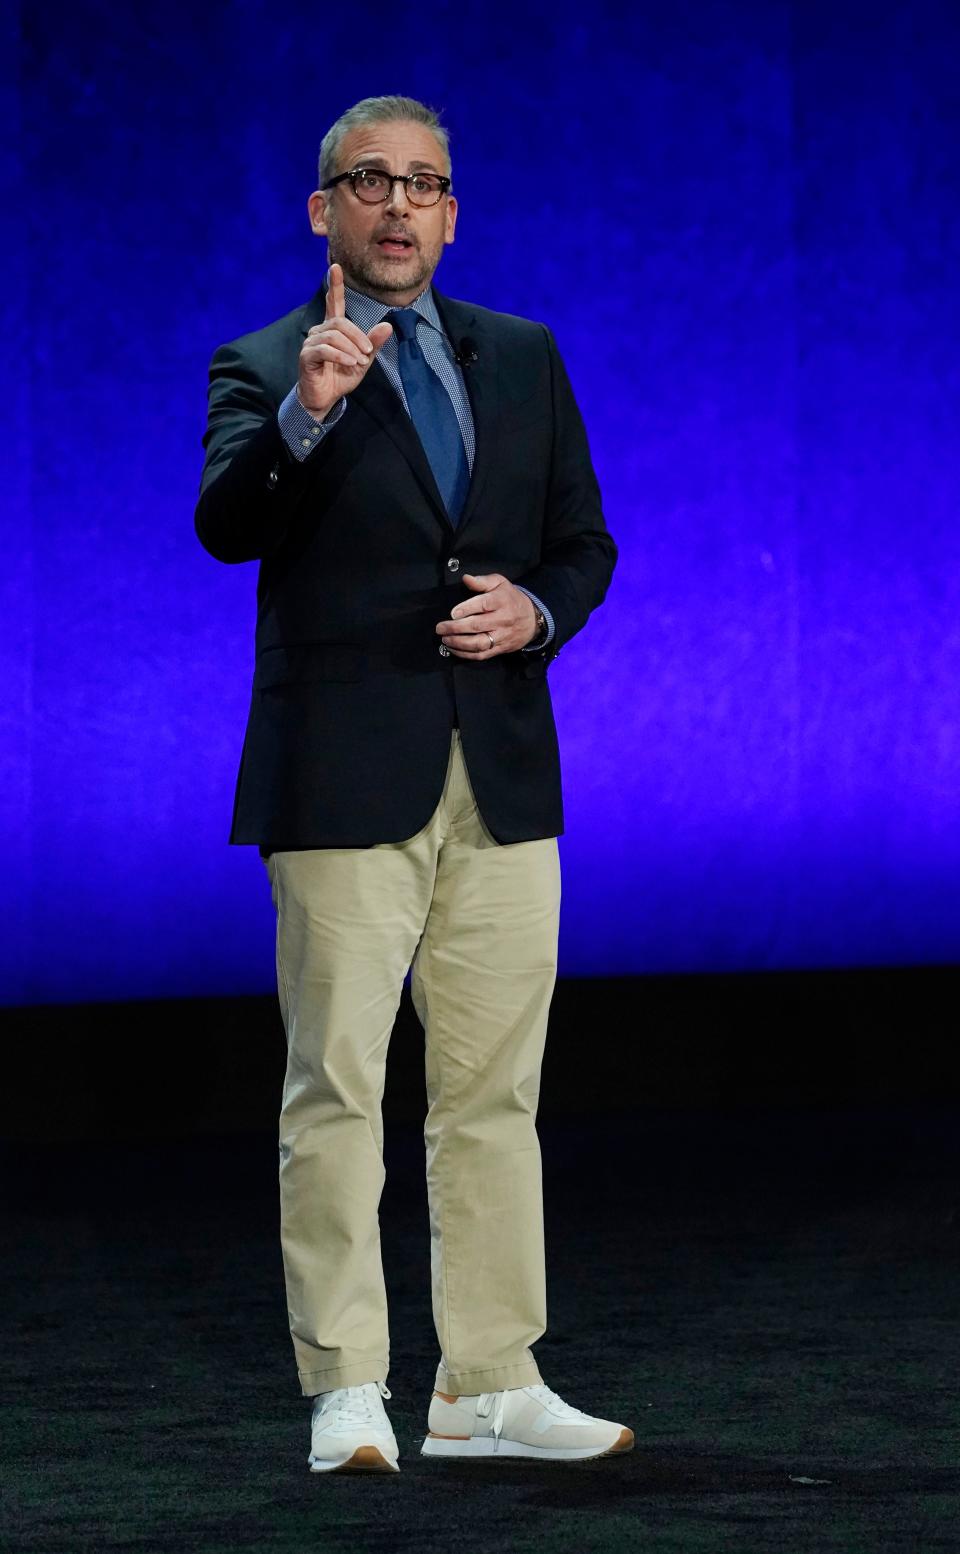 Steve Carell, a voice cast member in the upcoming animated film "Minions: The Rise of Gru," discusses the film during the Universal Pictures and Focus Features presentation at CinemaCon 2022 at Caesars Palace, Wednesday, April 27, 2022, in Las Vegas. (AP Photo/Chris Pizzello) ORG XMIT: CACP132